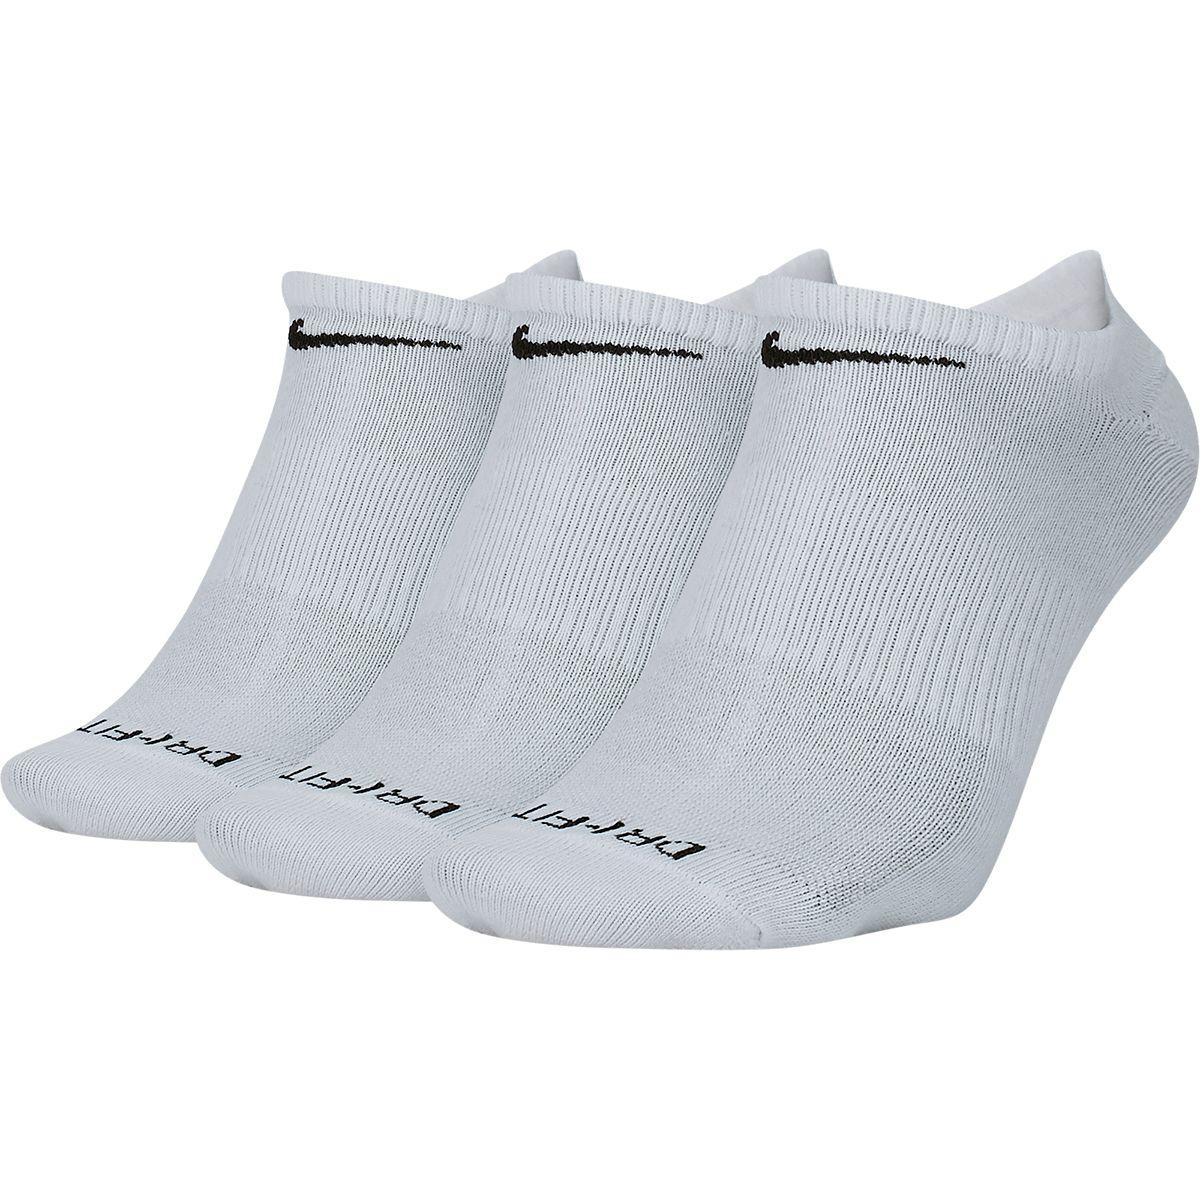 Nike Cotton Everyday Plus Lightweight Ns Sock -3 Pack in White/Black ...